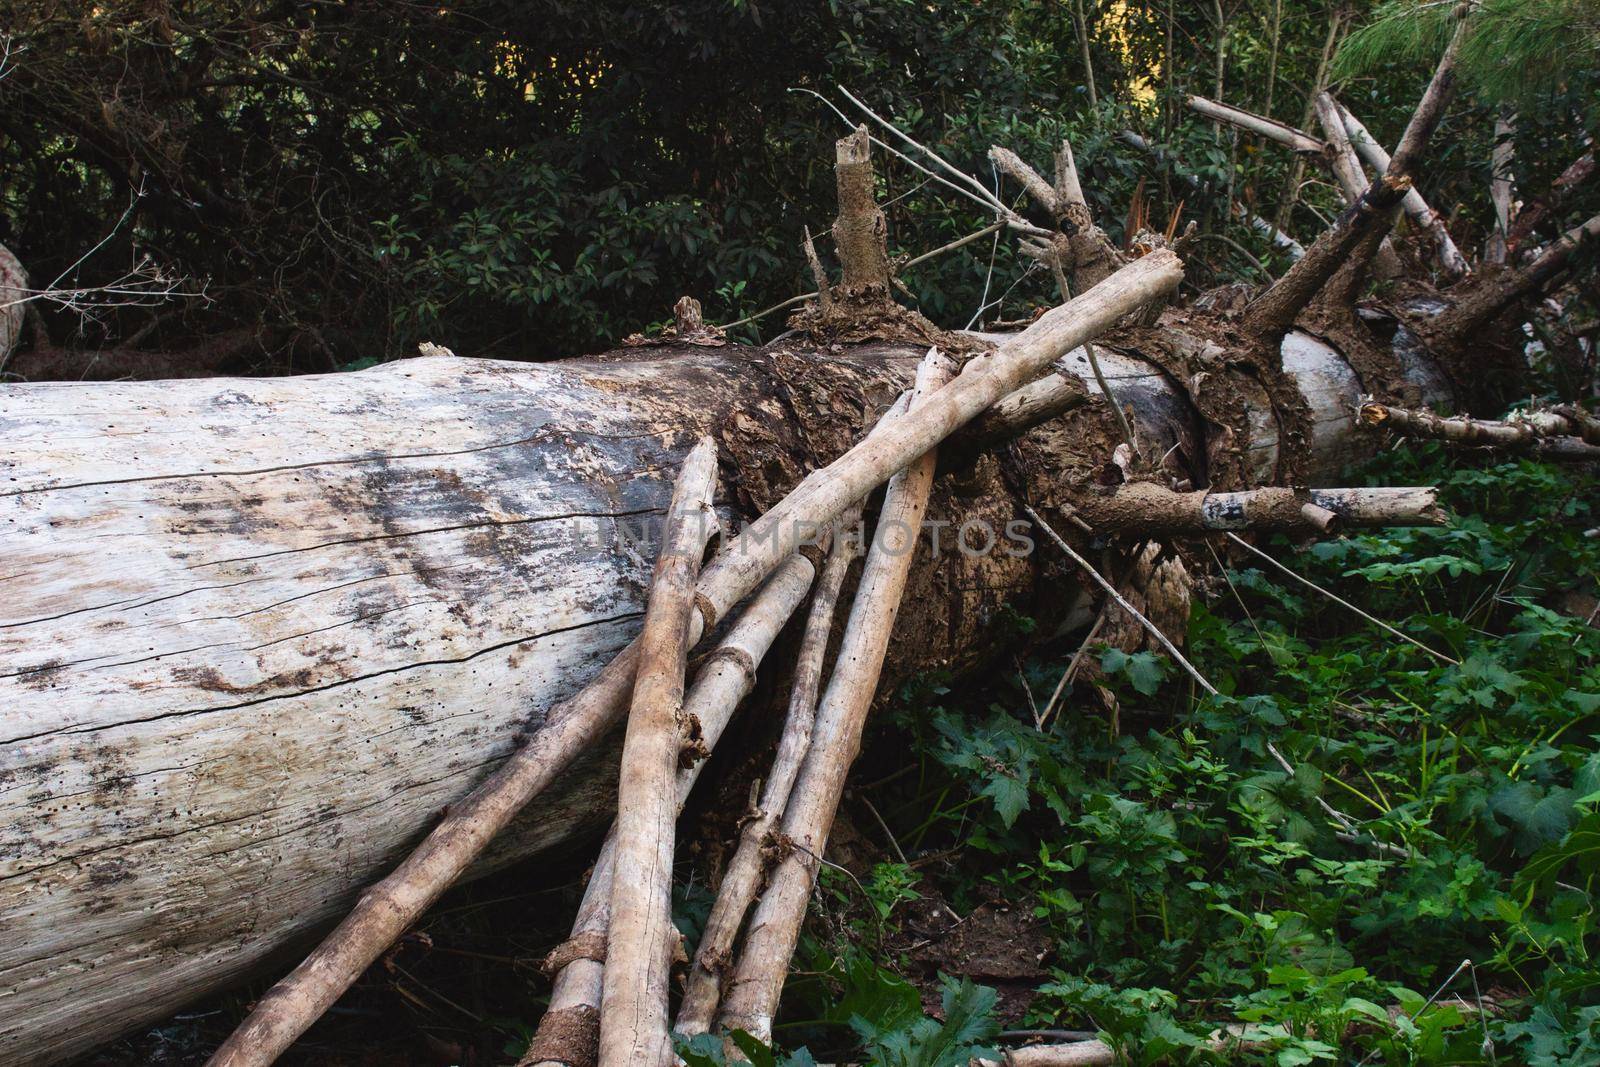 Uprooted fallen tree trunk in a forest